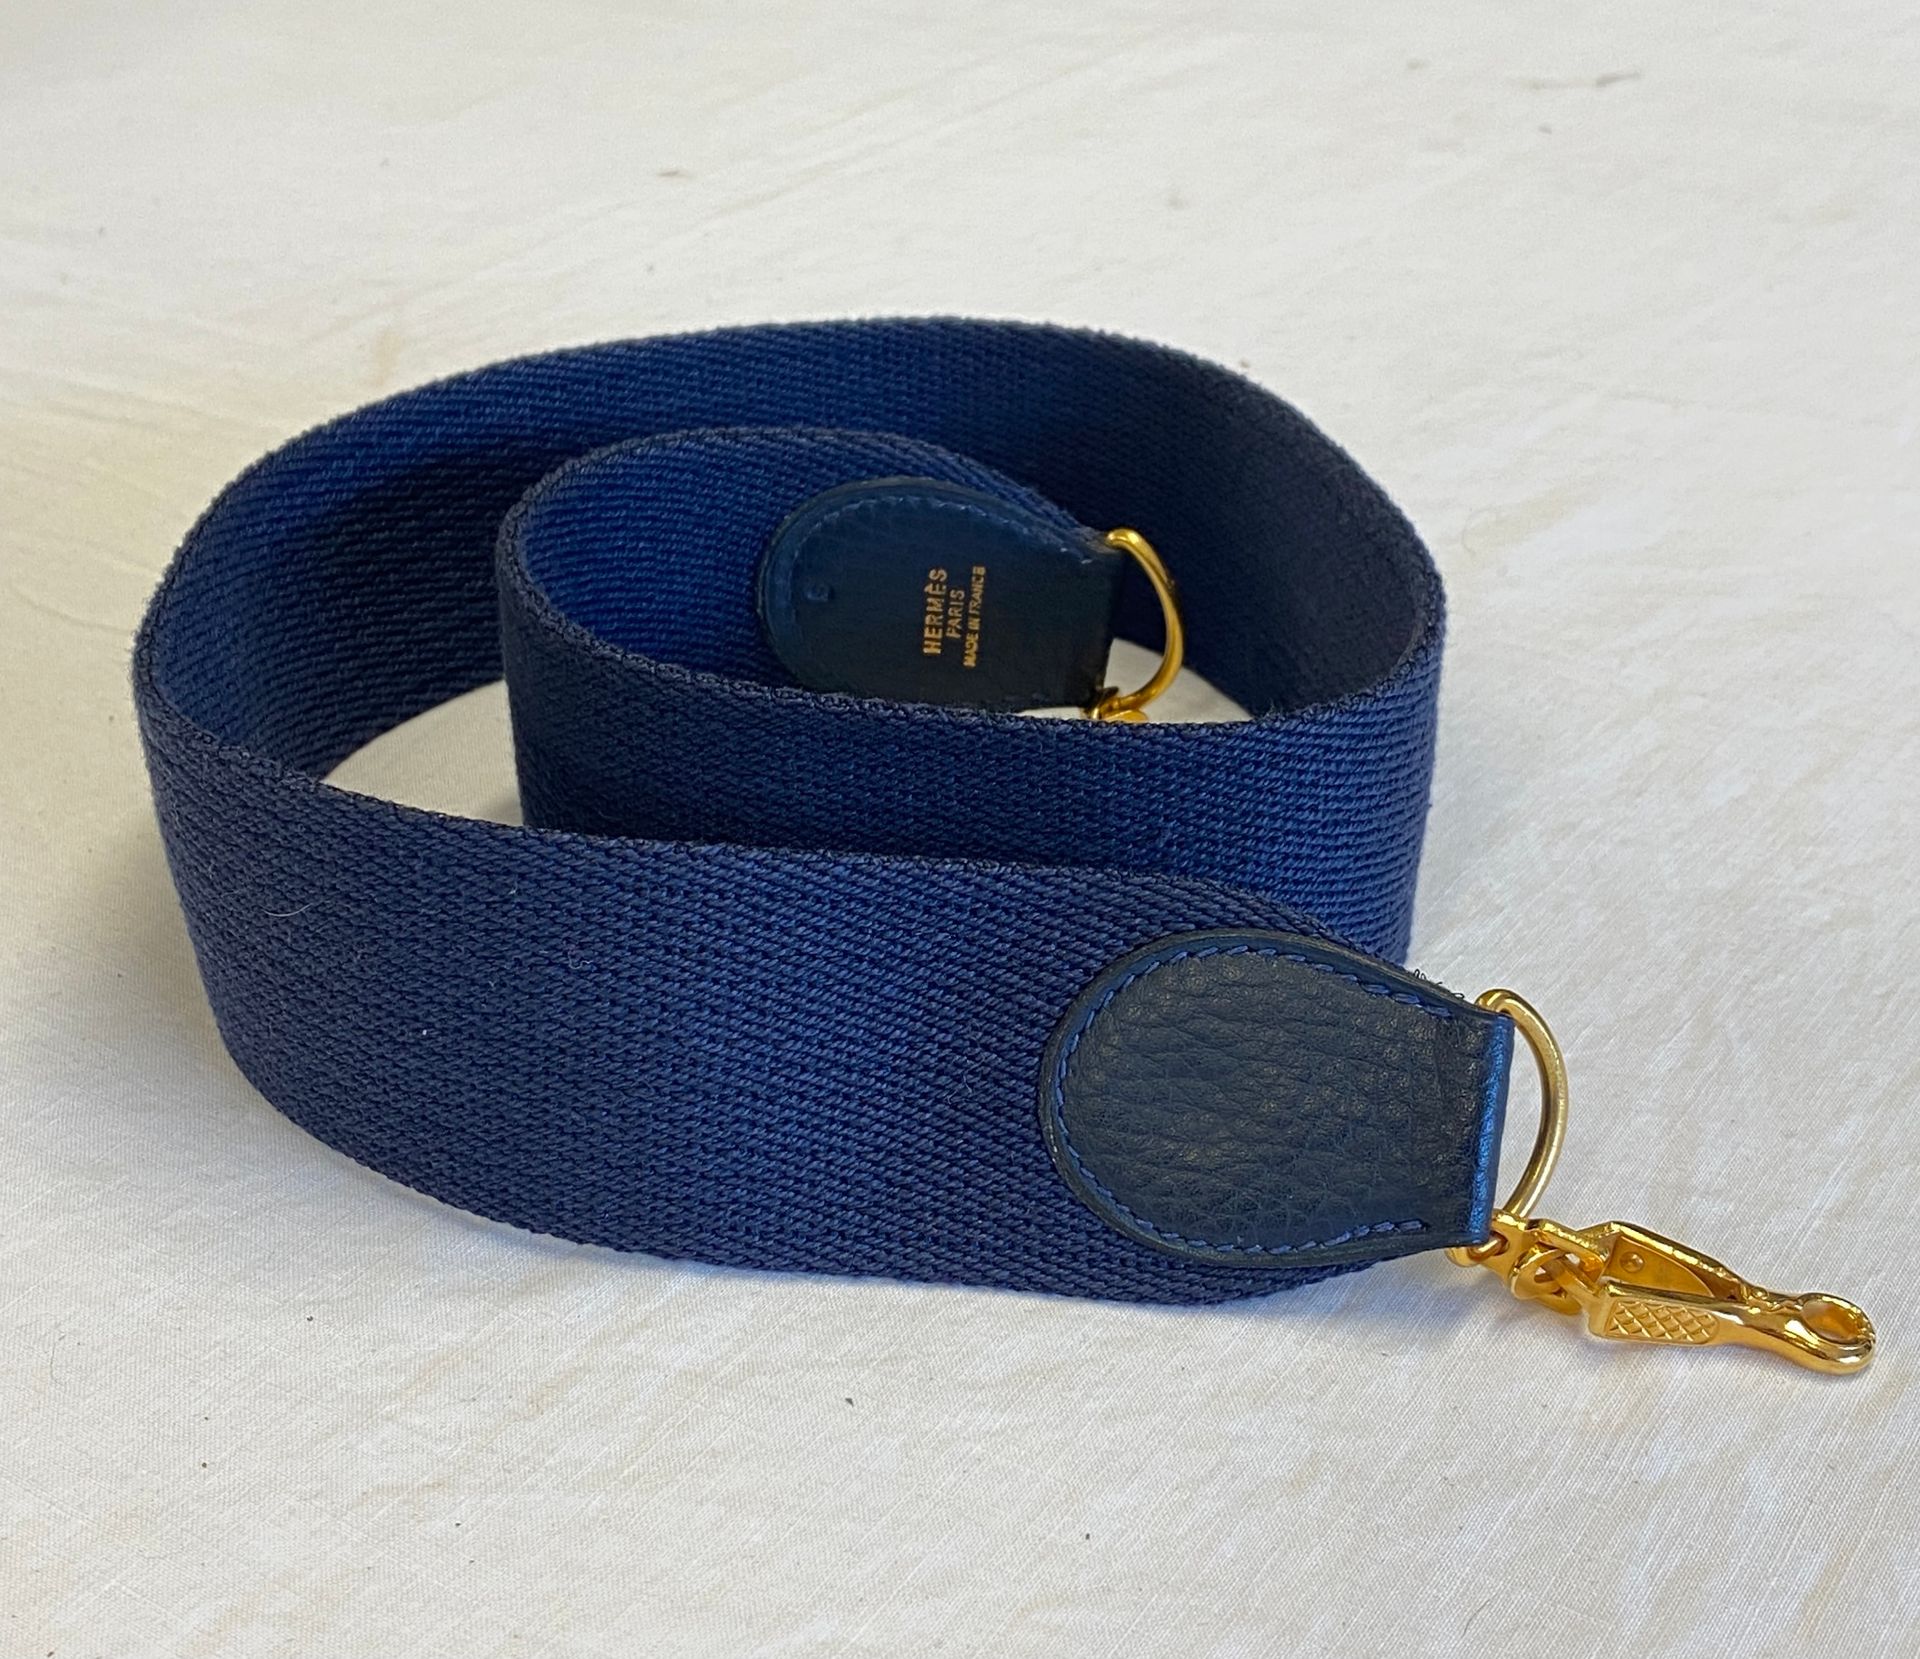 HERMES Paris made in France - BANDOULIERE STRAP in navy …